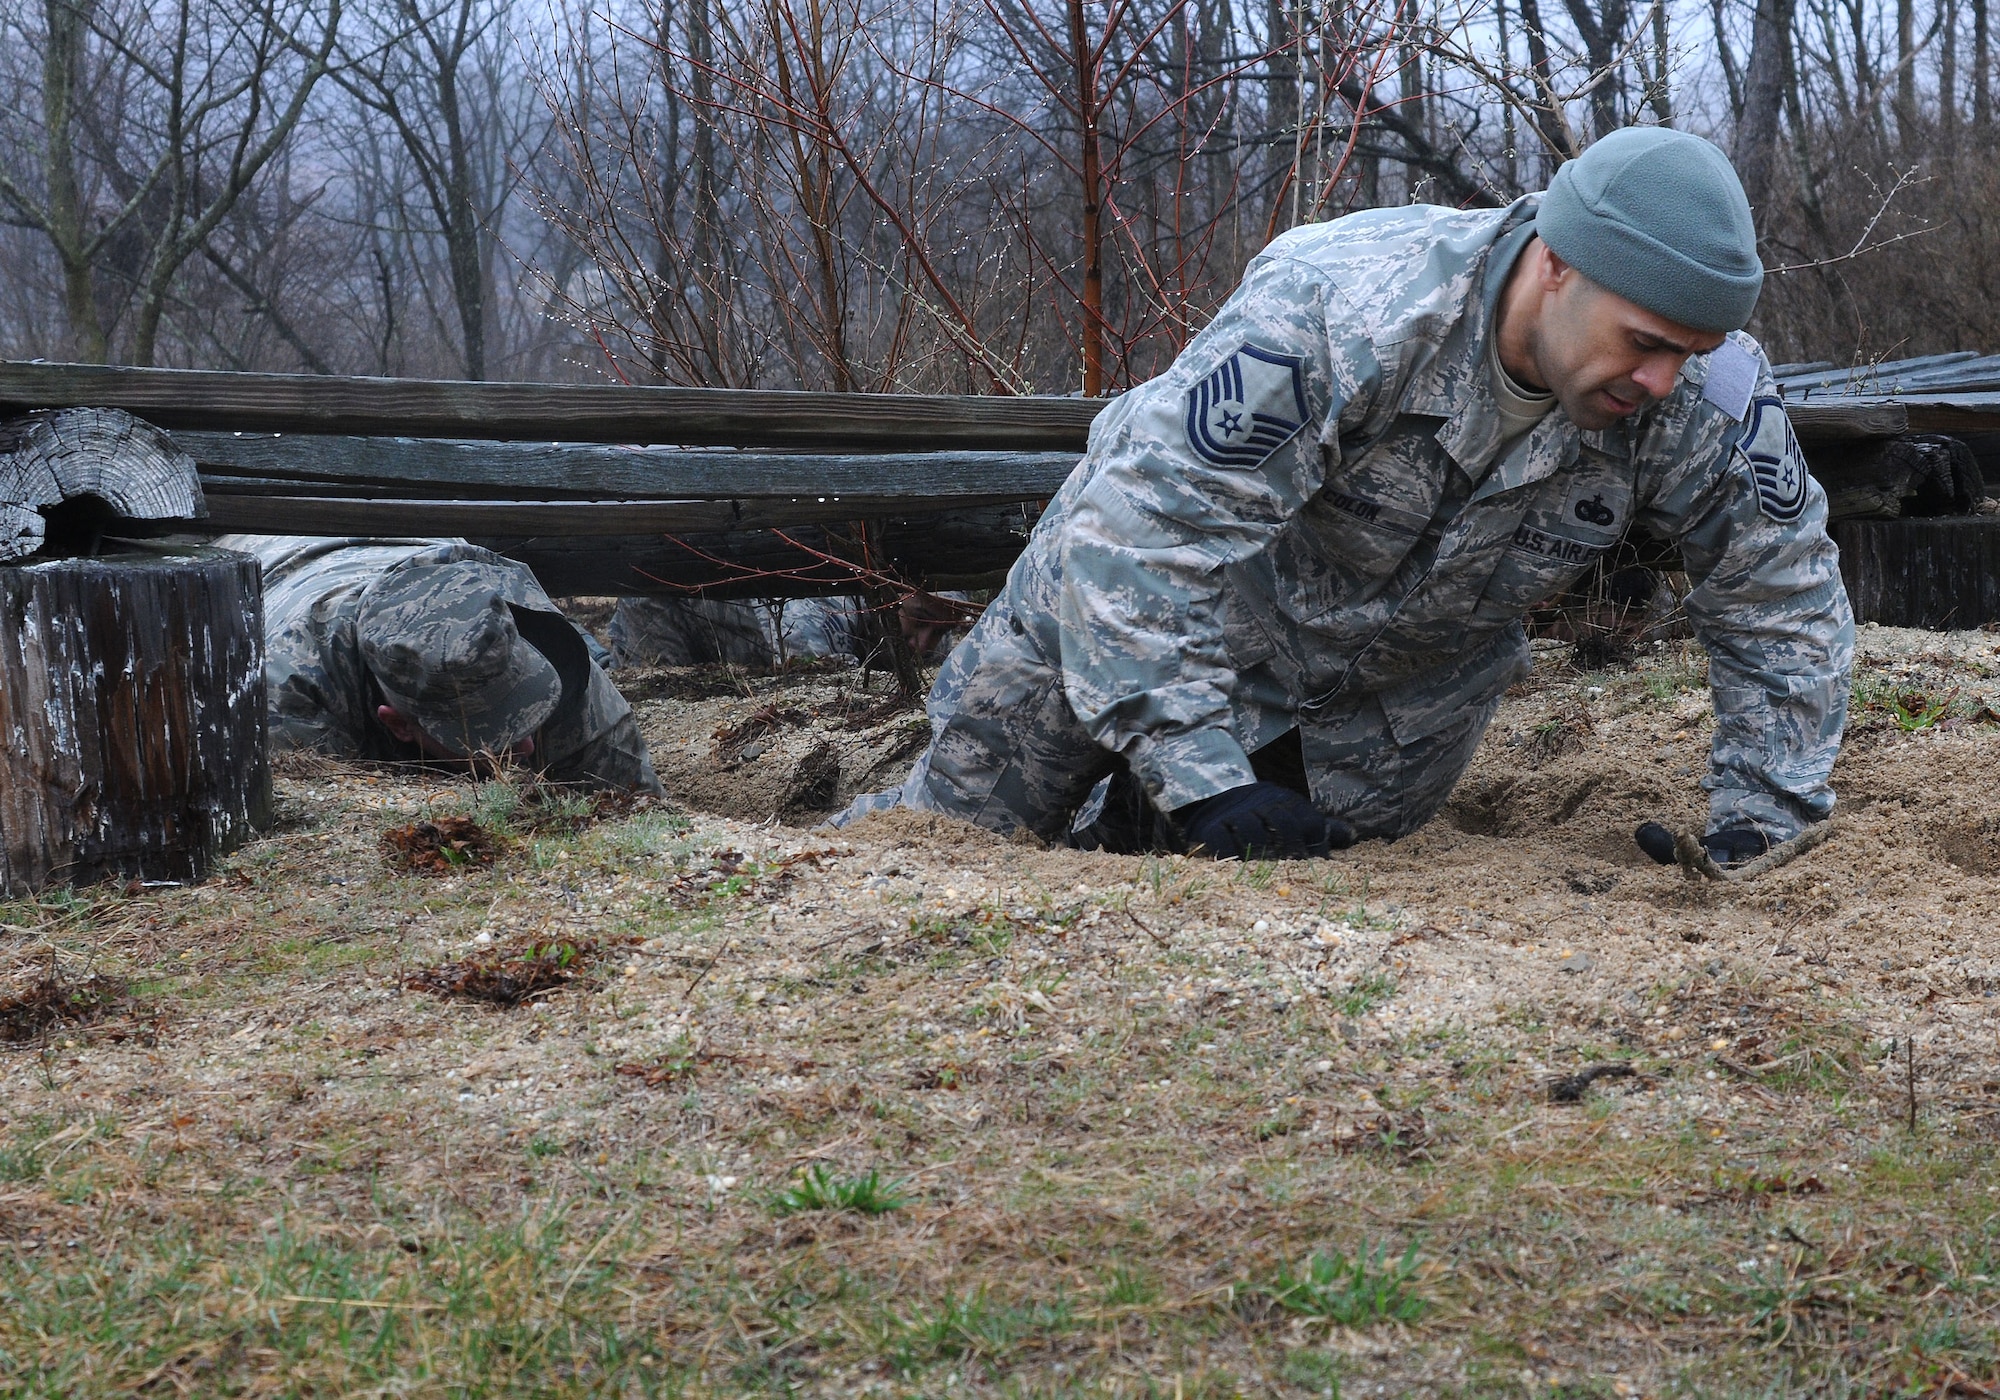 Master Sgt. Miguel Colon, 111th Security Forces Squadron, completes the low-crawl portion of the obstacle course during a four-day team building and skills-training event, April 9 – 12, 2015, at the state’s joint-force training center at Fort Indiantown Gap, Pennsylvania and Gettysburg National Military Park. Nearly 60 Guardsmen from the 111th Attack Wing of Horsham Air Guard Station participated in the super drill. (U.S. Air National Guard photo/Released)